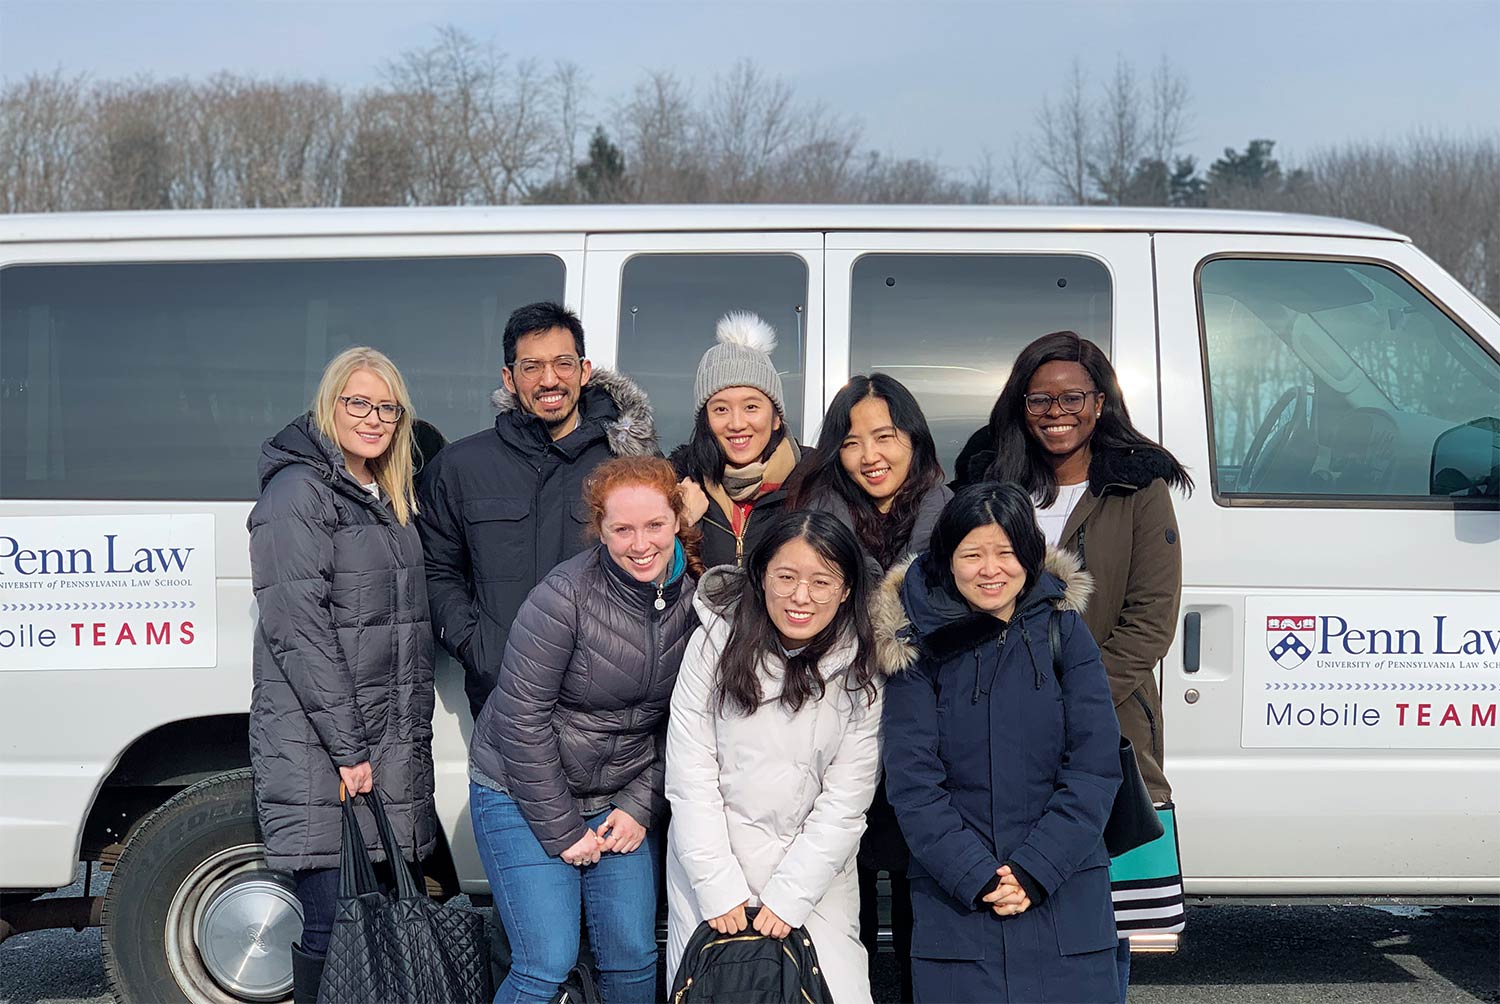 A Spring 2019 Mobile TEAMS crew gears up to offer legal aid in rural parts of Pennsylvania